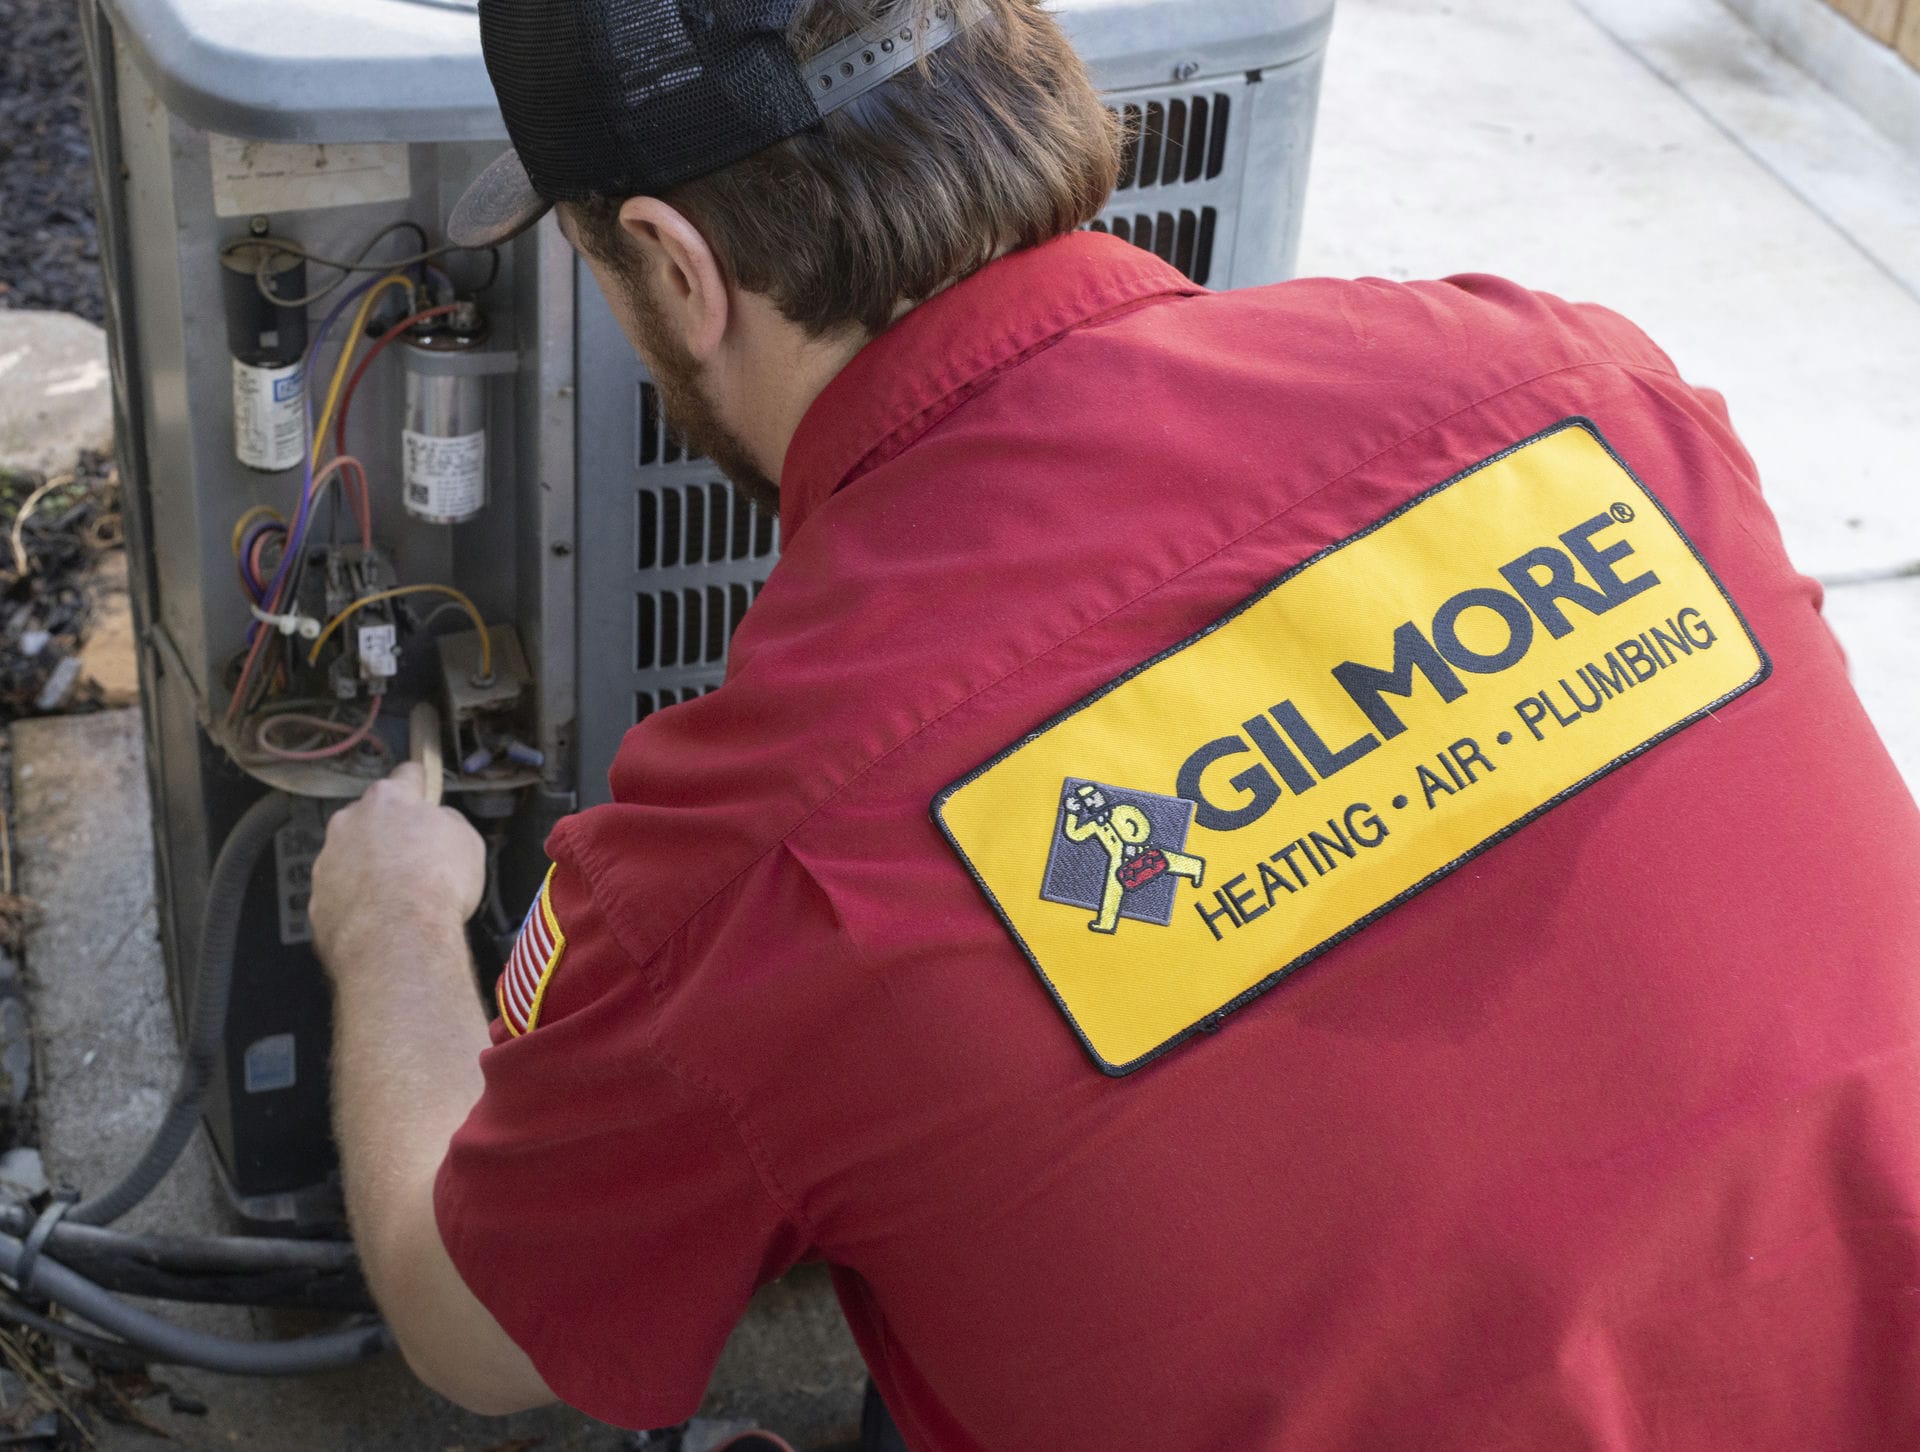 Gilmore Heating Air and Plumbing Technician at work